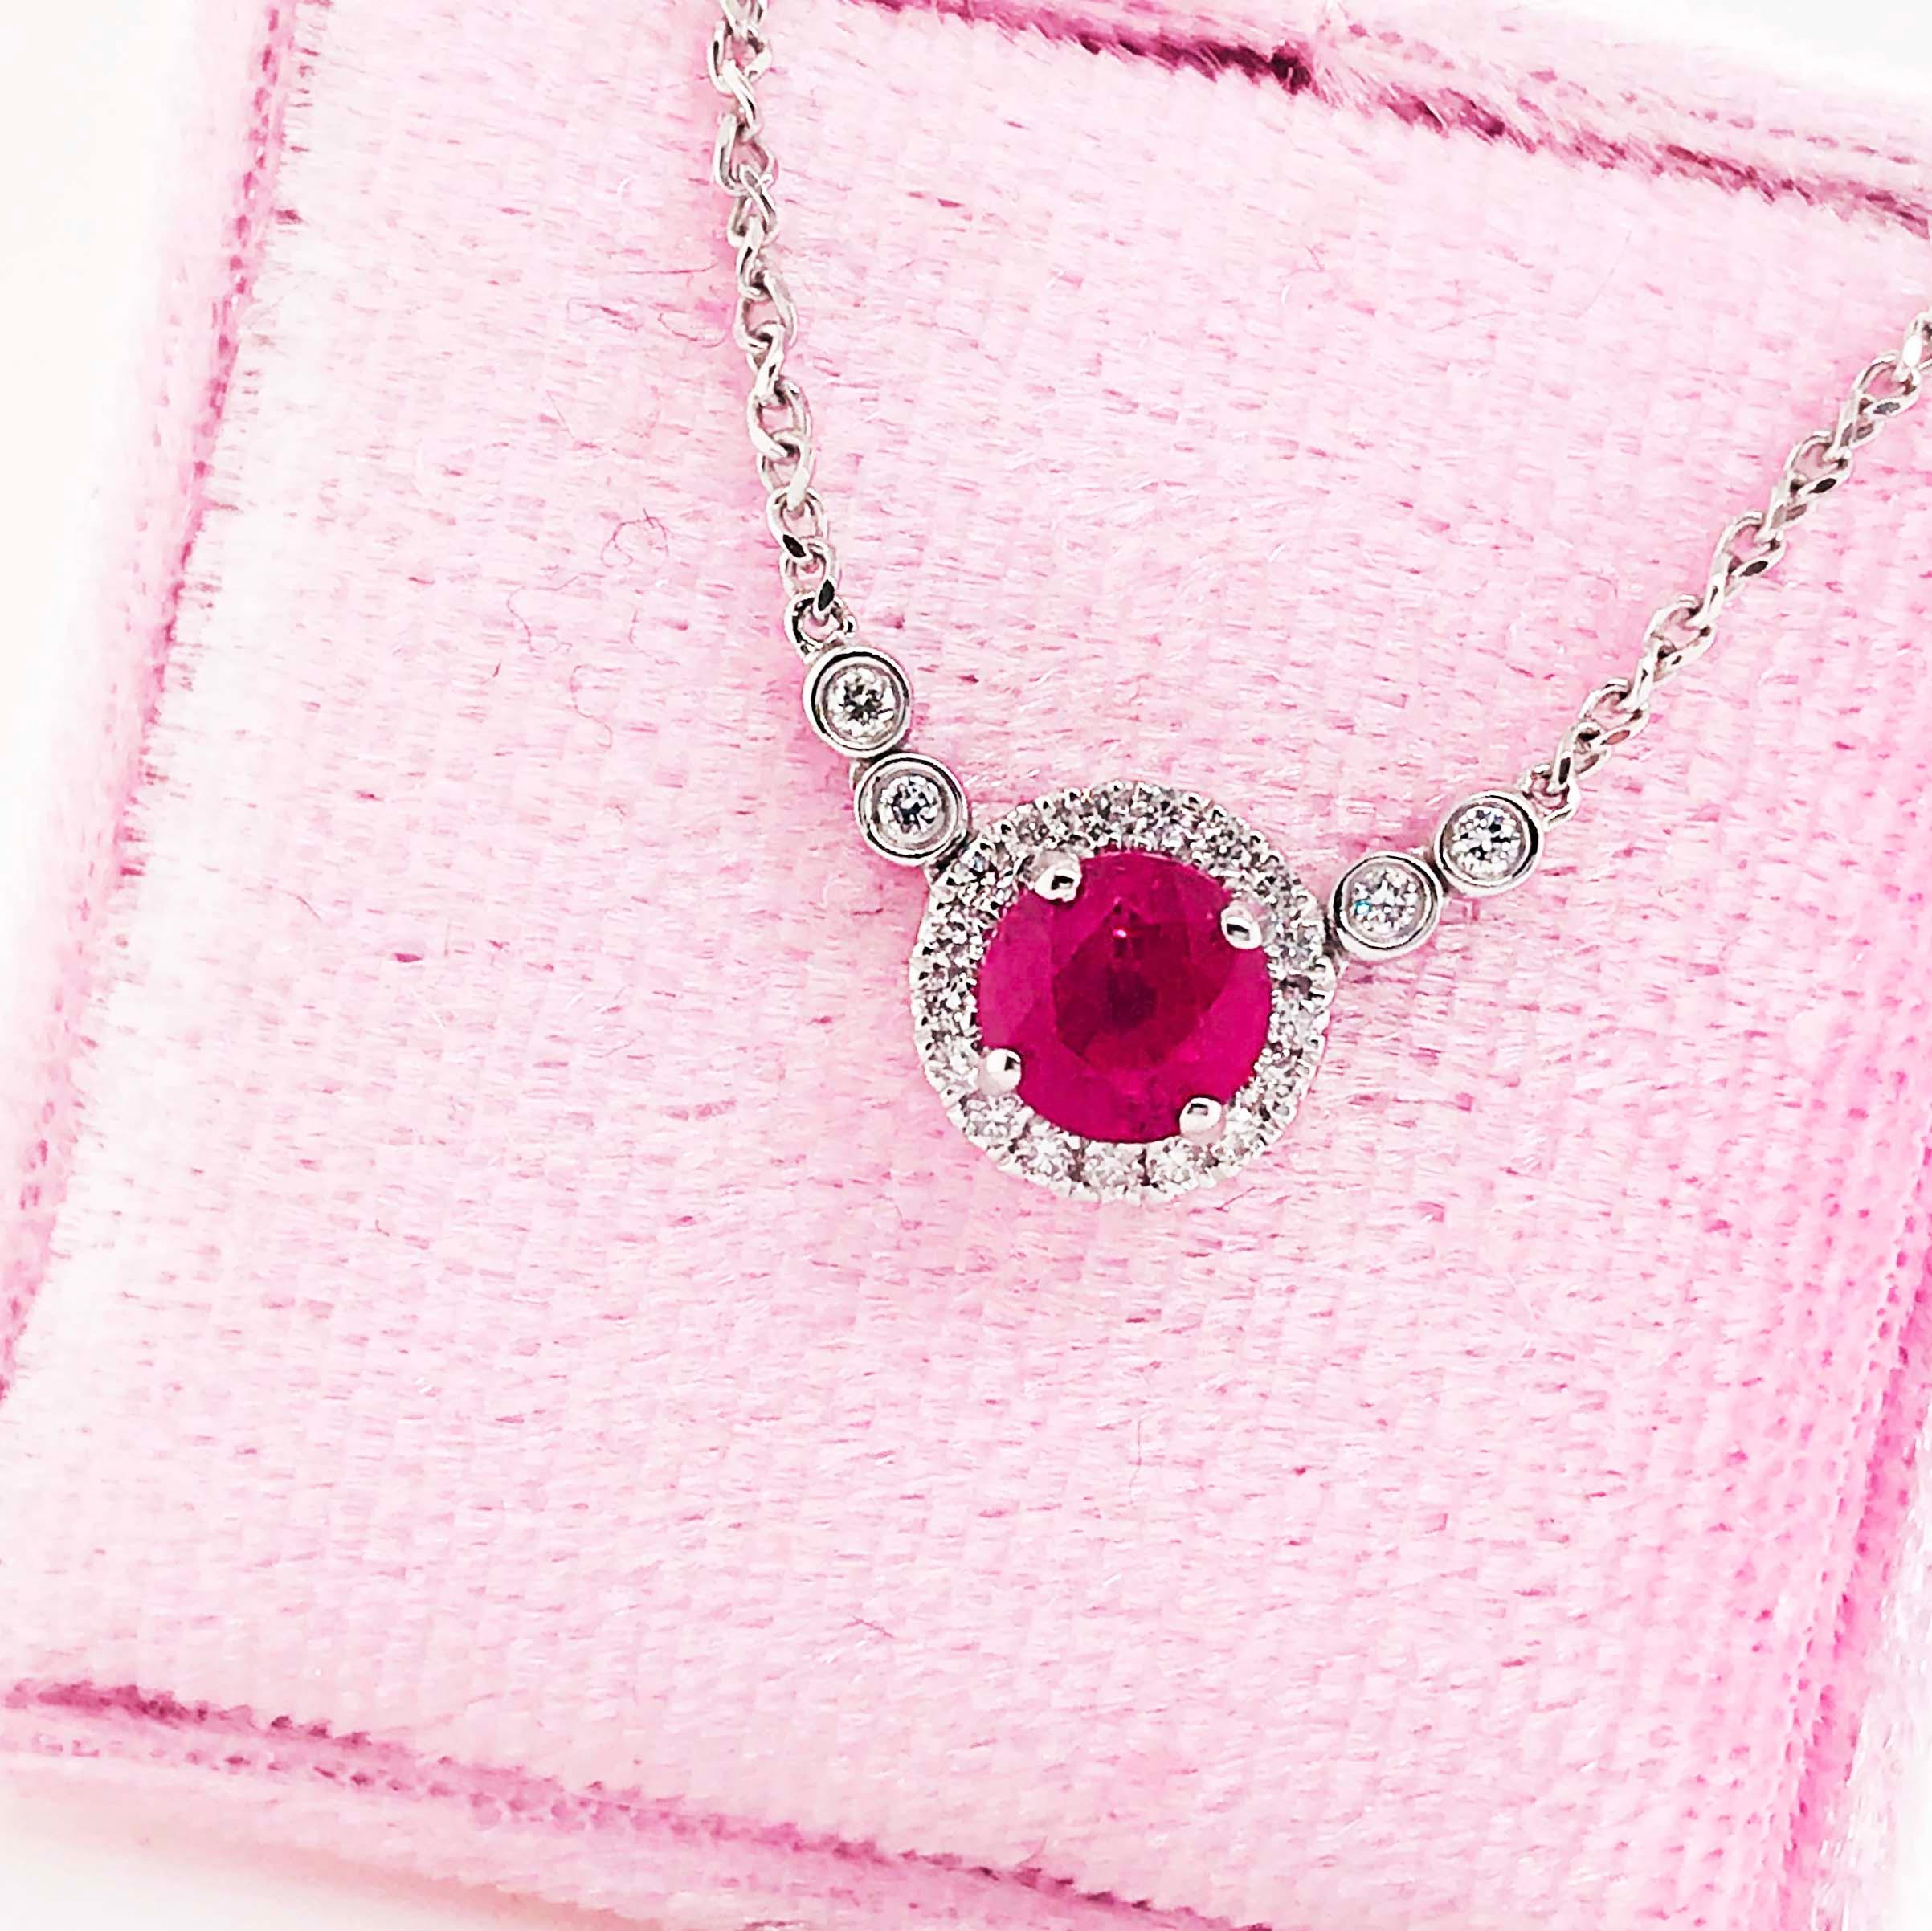 Gorgeous ruby necklace with a genuine, natural diamond halo and genuine, natural ruby gemstone! This stunning necklace has a round, faceted polished ruby that has a bright ruby red color! The precious gemstone is set in a diamond halo with round